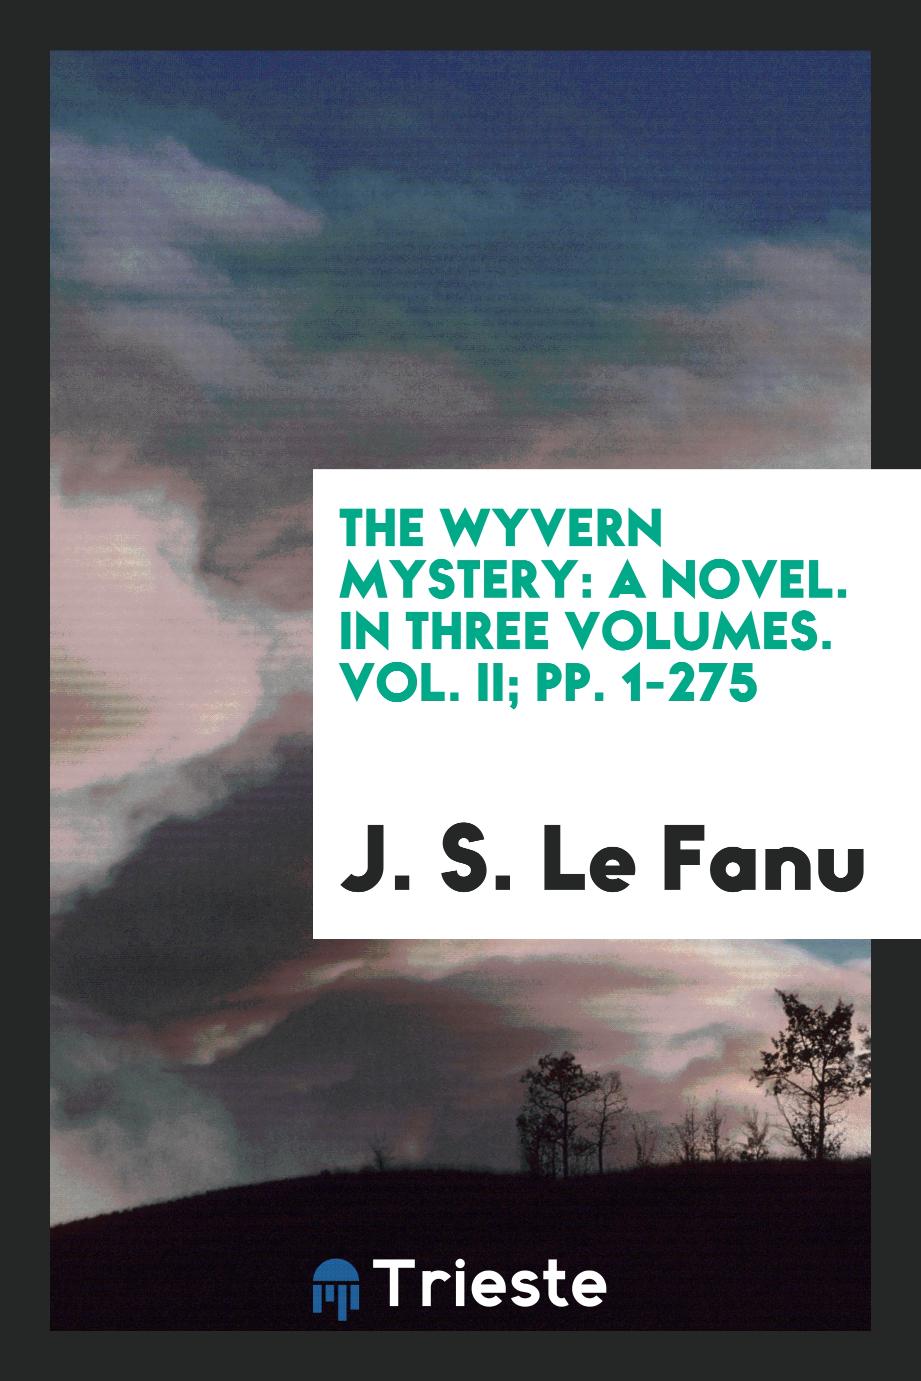 The Wyvern Mystery: A Novel. In Three Volumes. Vol. II; pp. 1-275